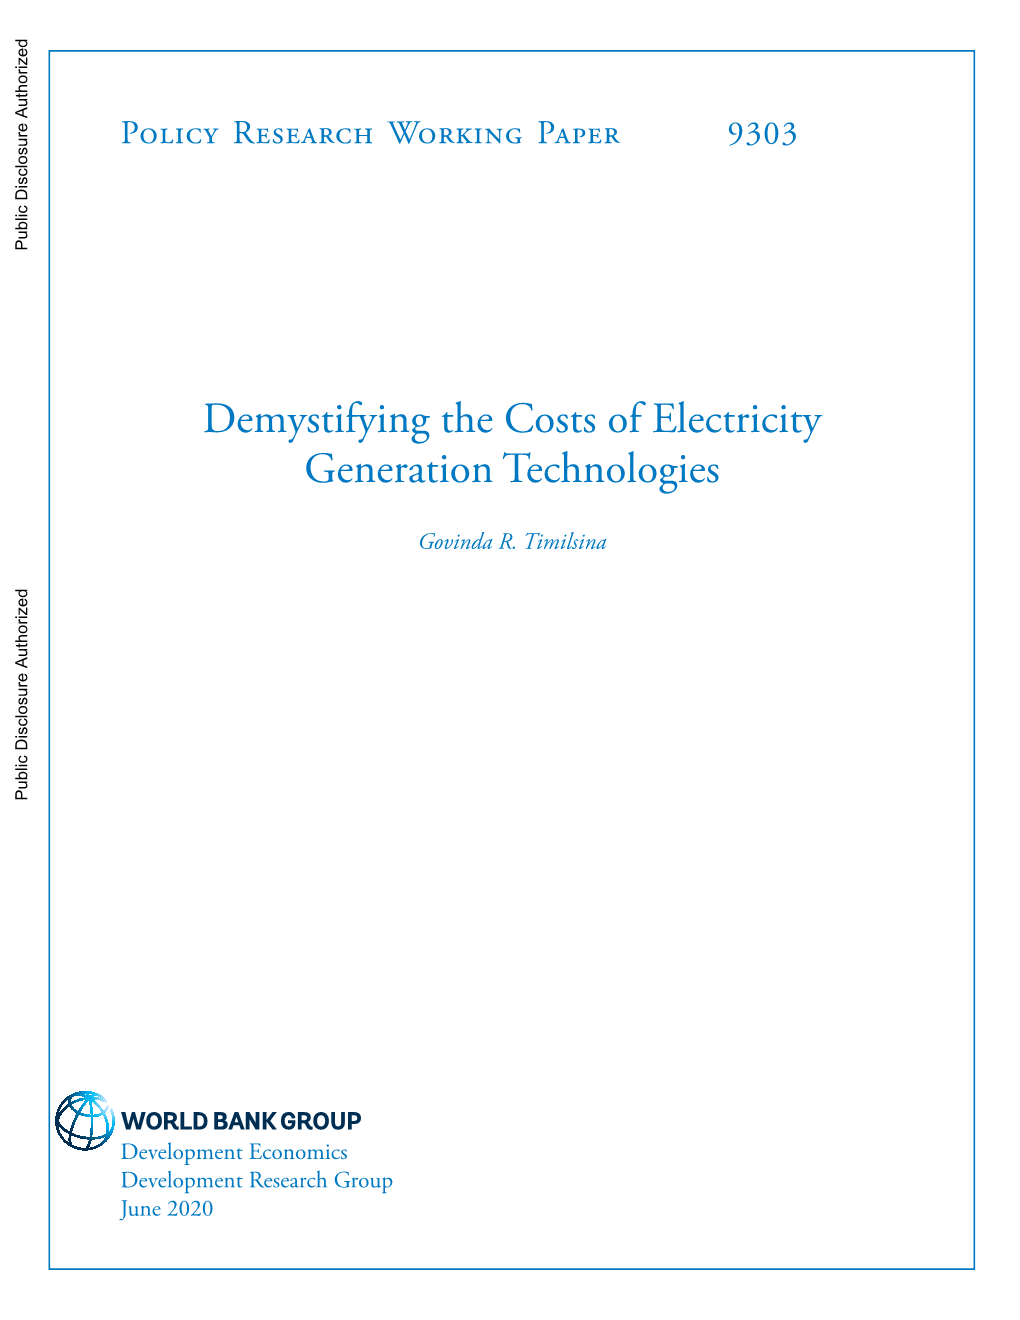 Demystifying the Costs of Electricity Generation Technologies